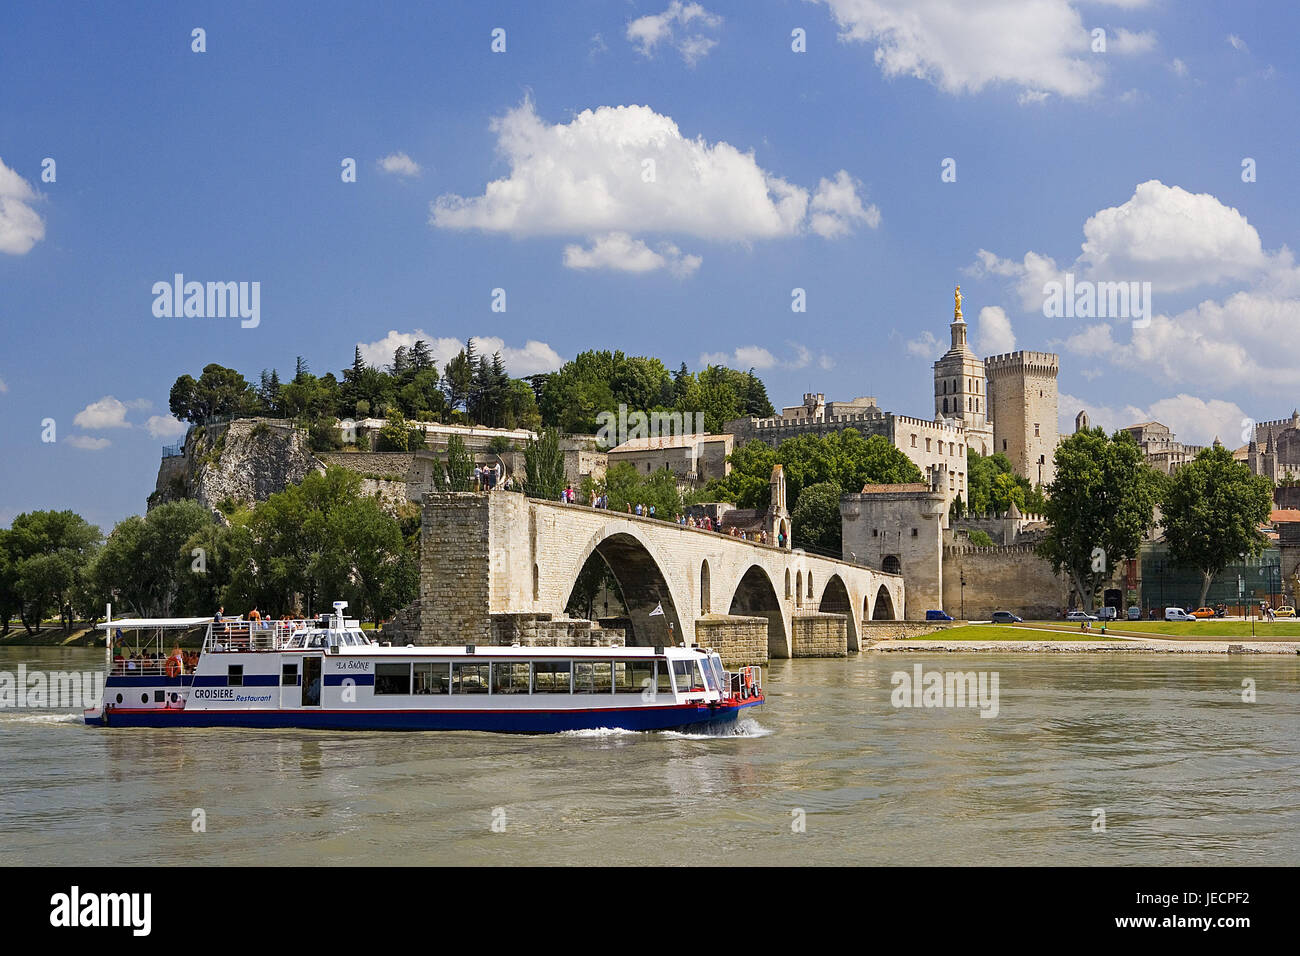 France, Provence, Avignon, town view, pope's palace, river, Pont St-Benezet, holiday ship, town, palace, doubles palace, structure, architecture, culture, place of interest, destination, tourism, UNESCO-world cultural heritage, the Rhone, ship, tourist, person, boat trip, boot tour, riverboat journey, summer, sightseeing, Stock Photo